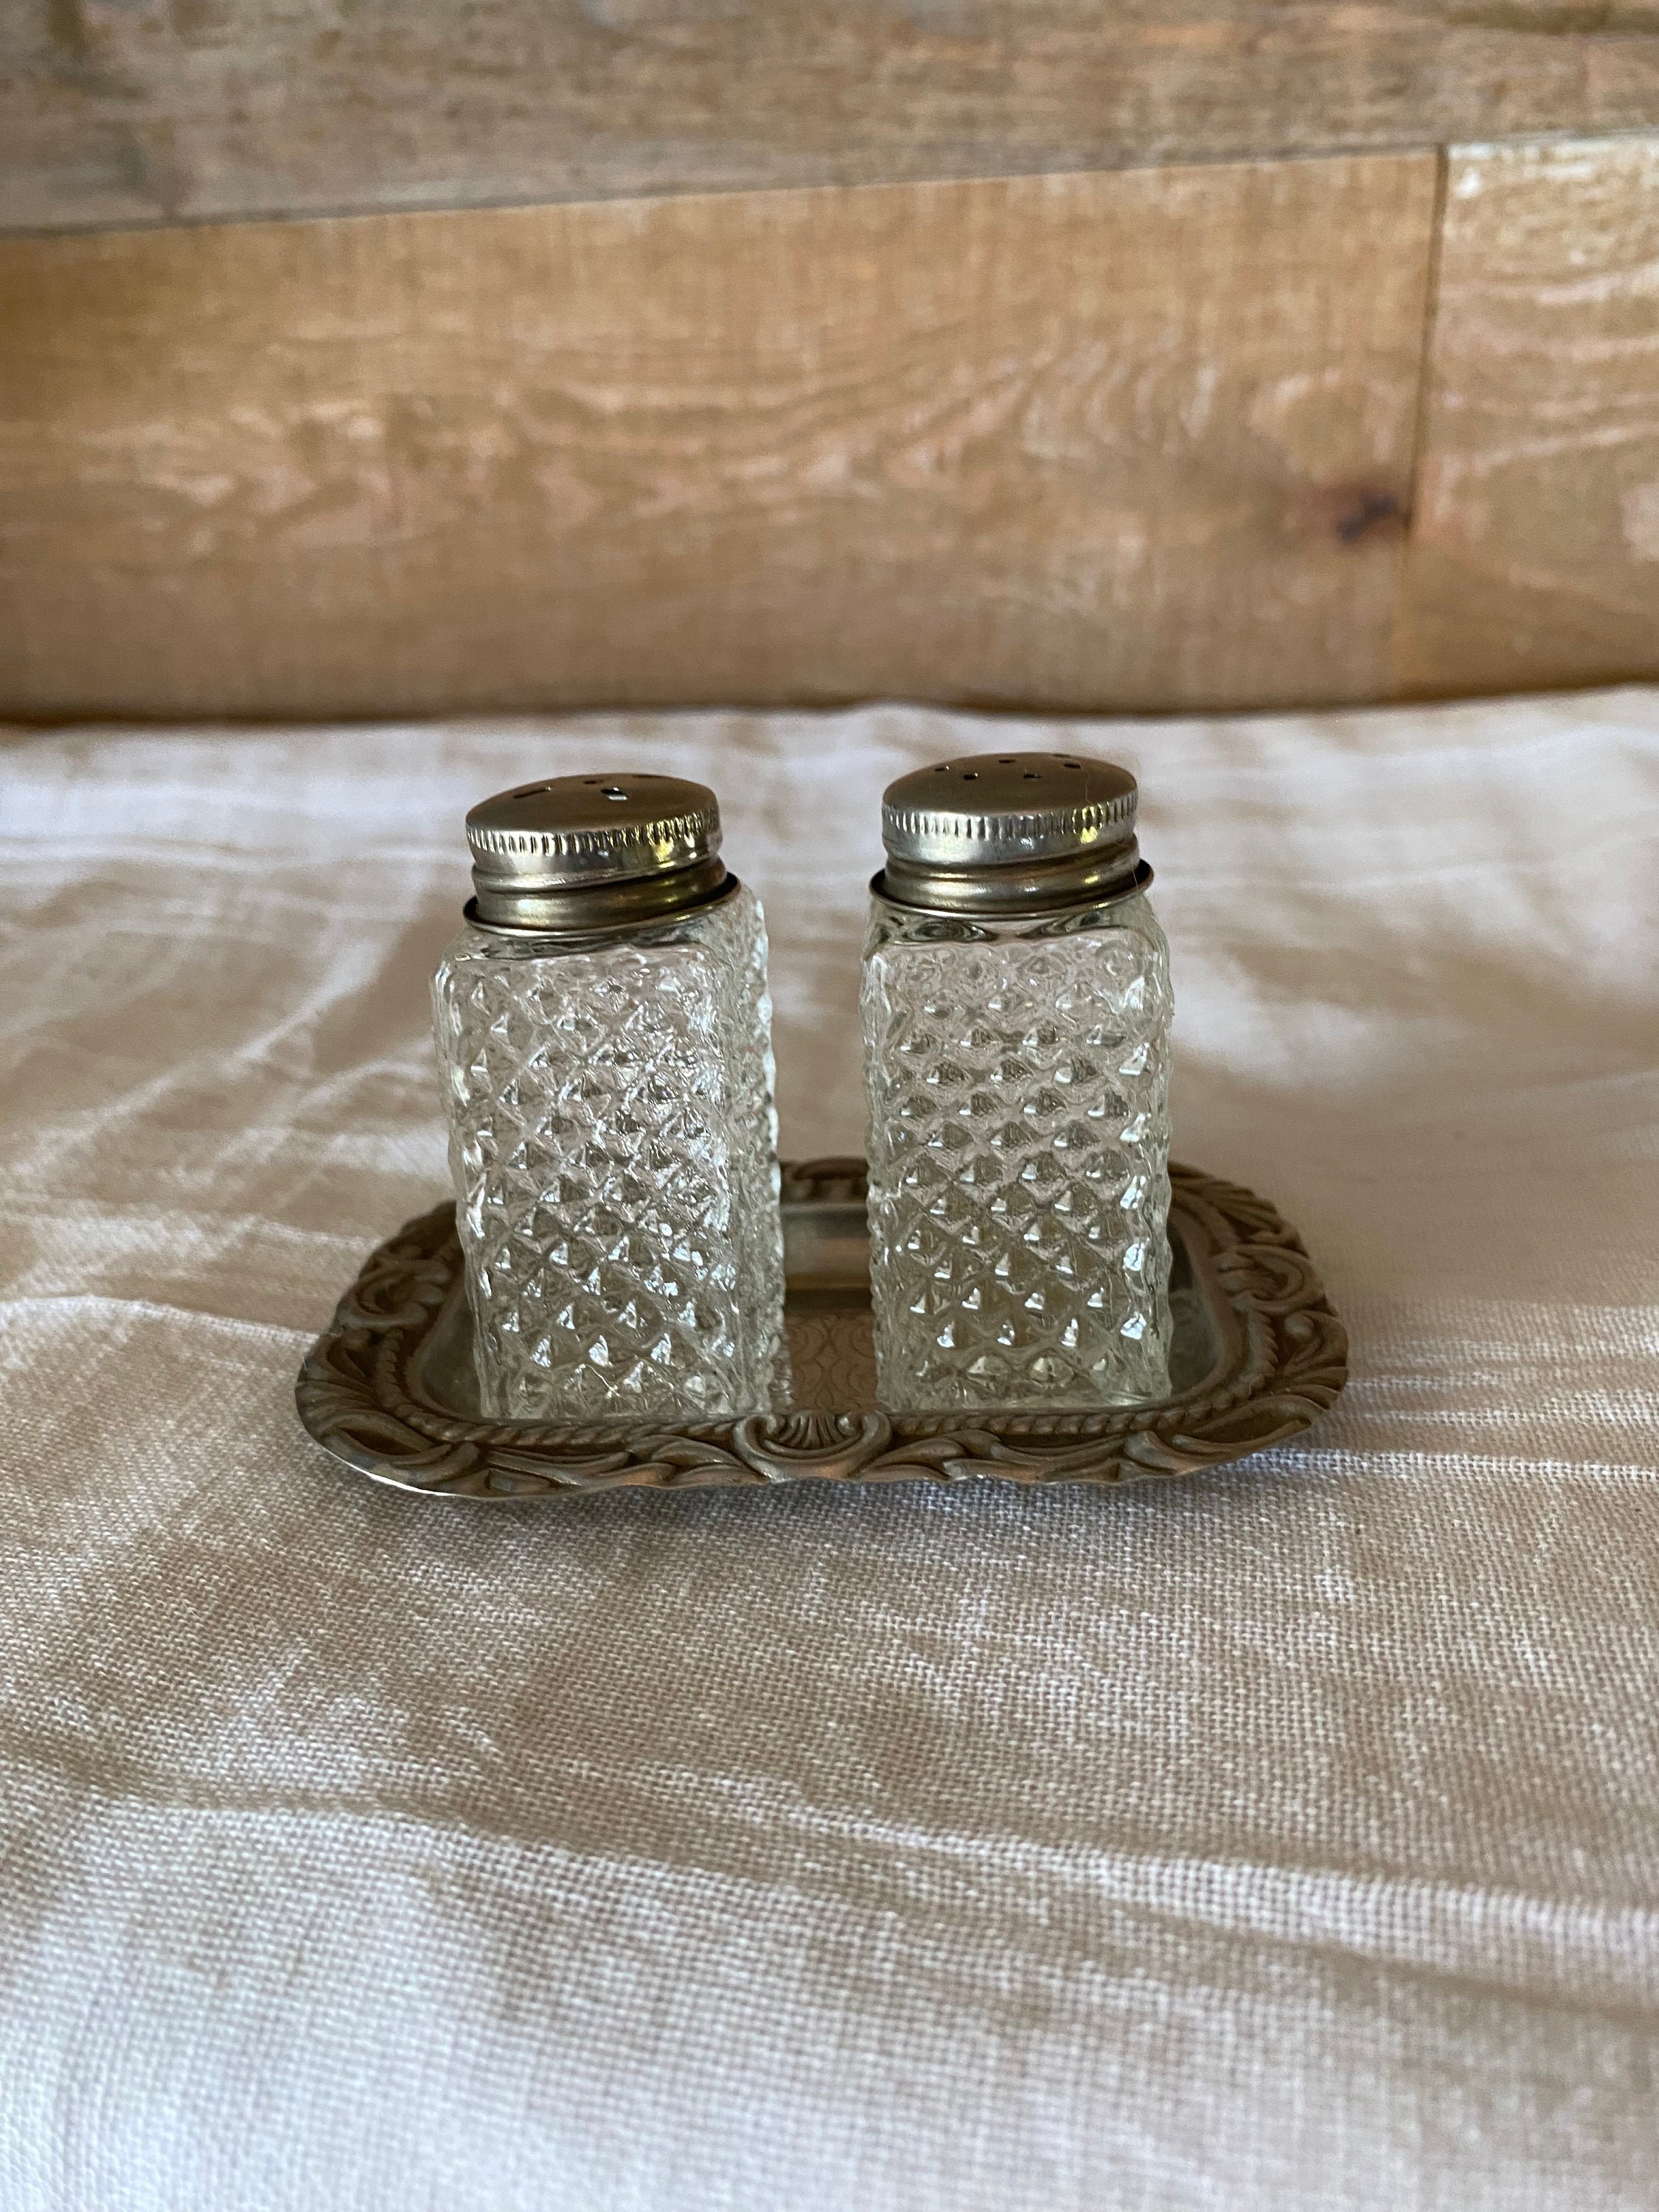 Salt and Pepper Shakers With Tray Vintage Unique Fancy Salt and Pepper  Shakers Cut Glass Silver Metal Tops and Silver Metal Serving Tray 